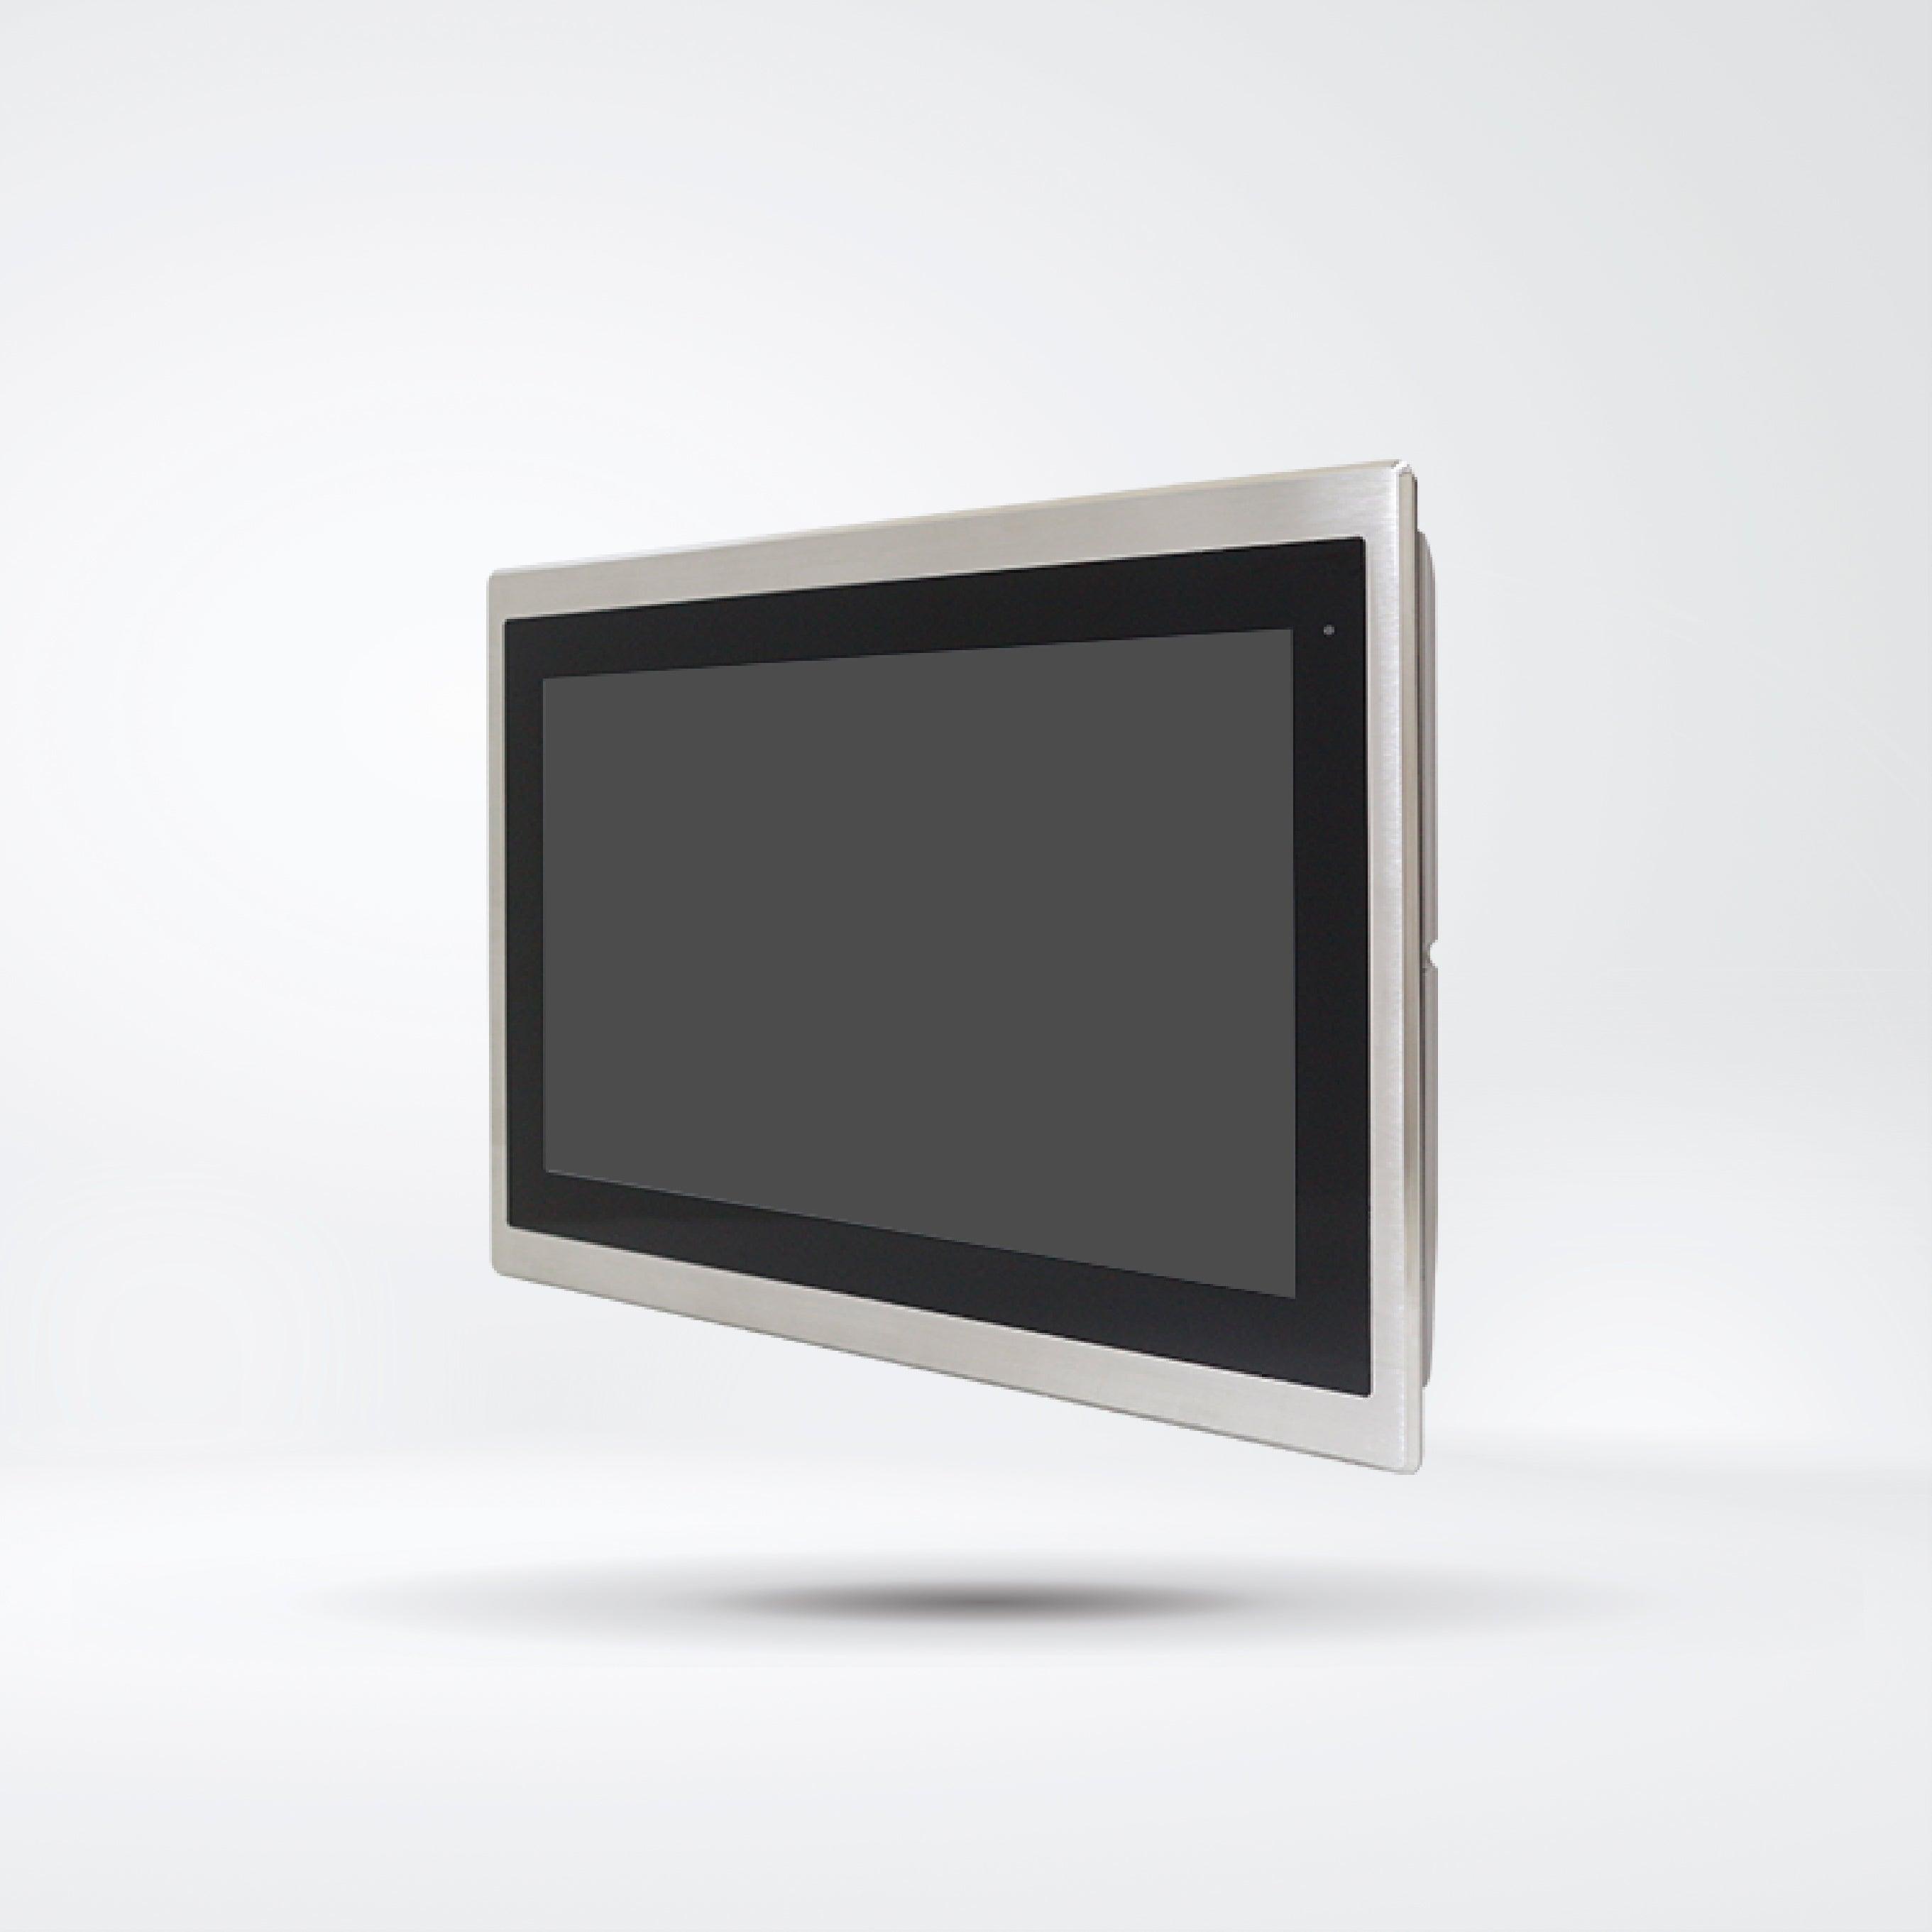 FABS-116P 15.6” Flat Front Panel IP66 Stainless Chassis Display - Riverplus